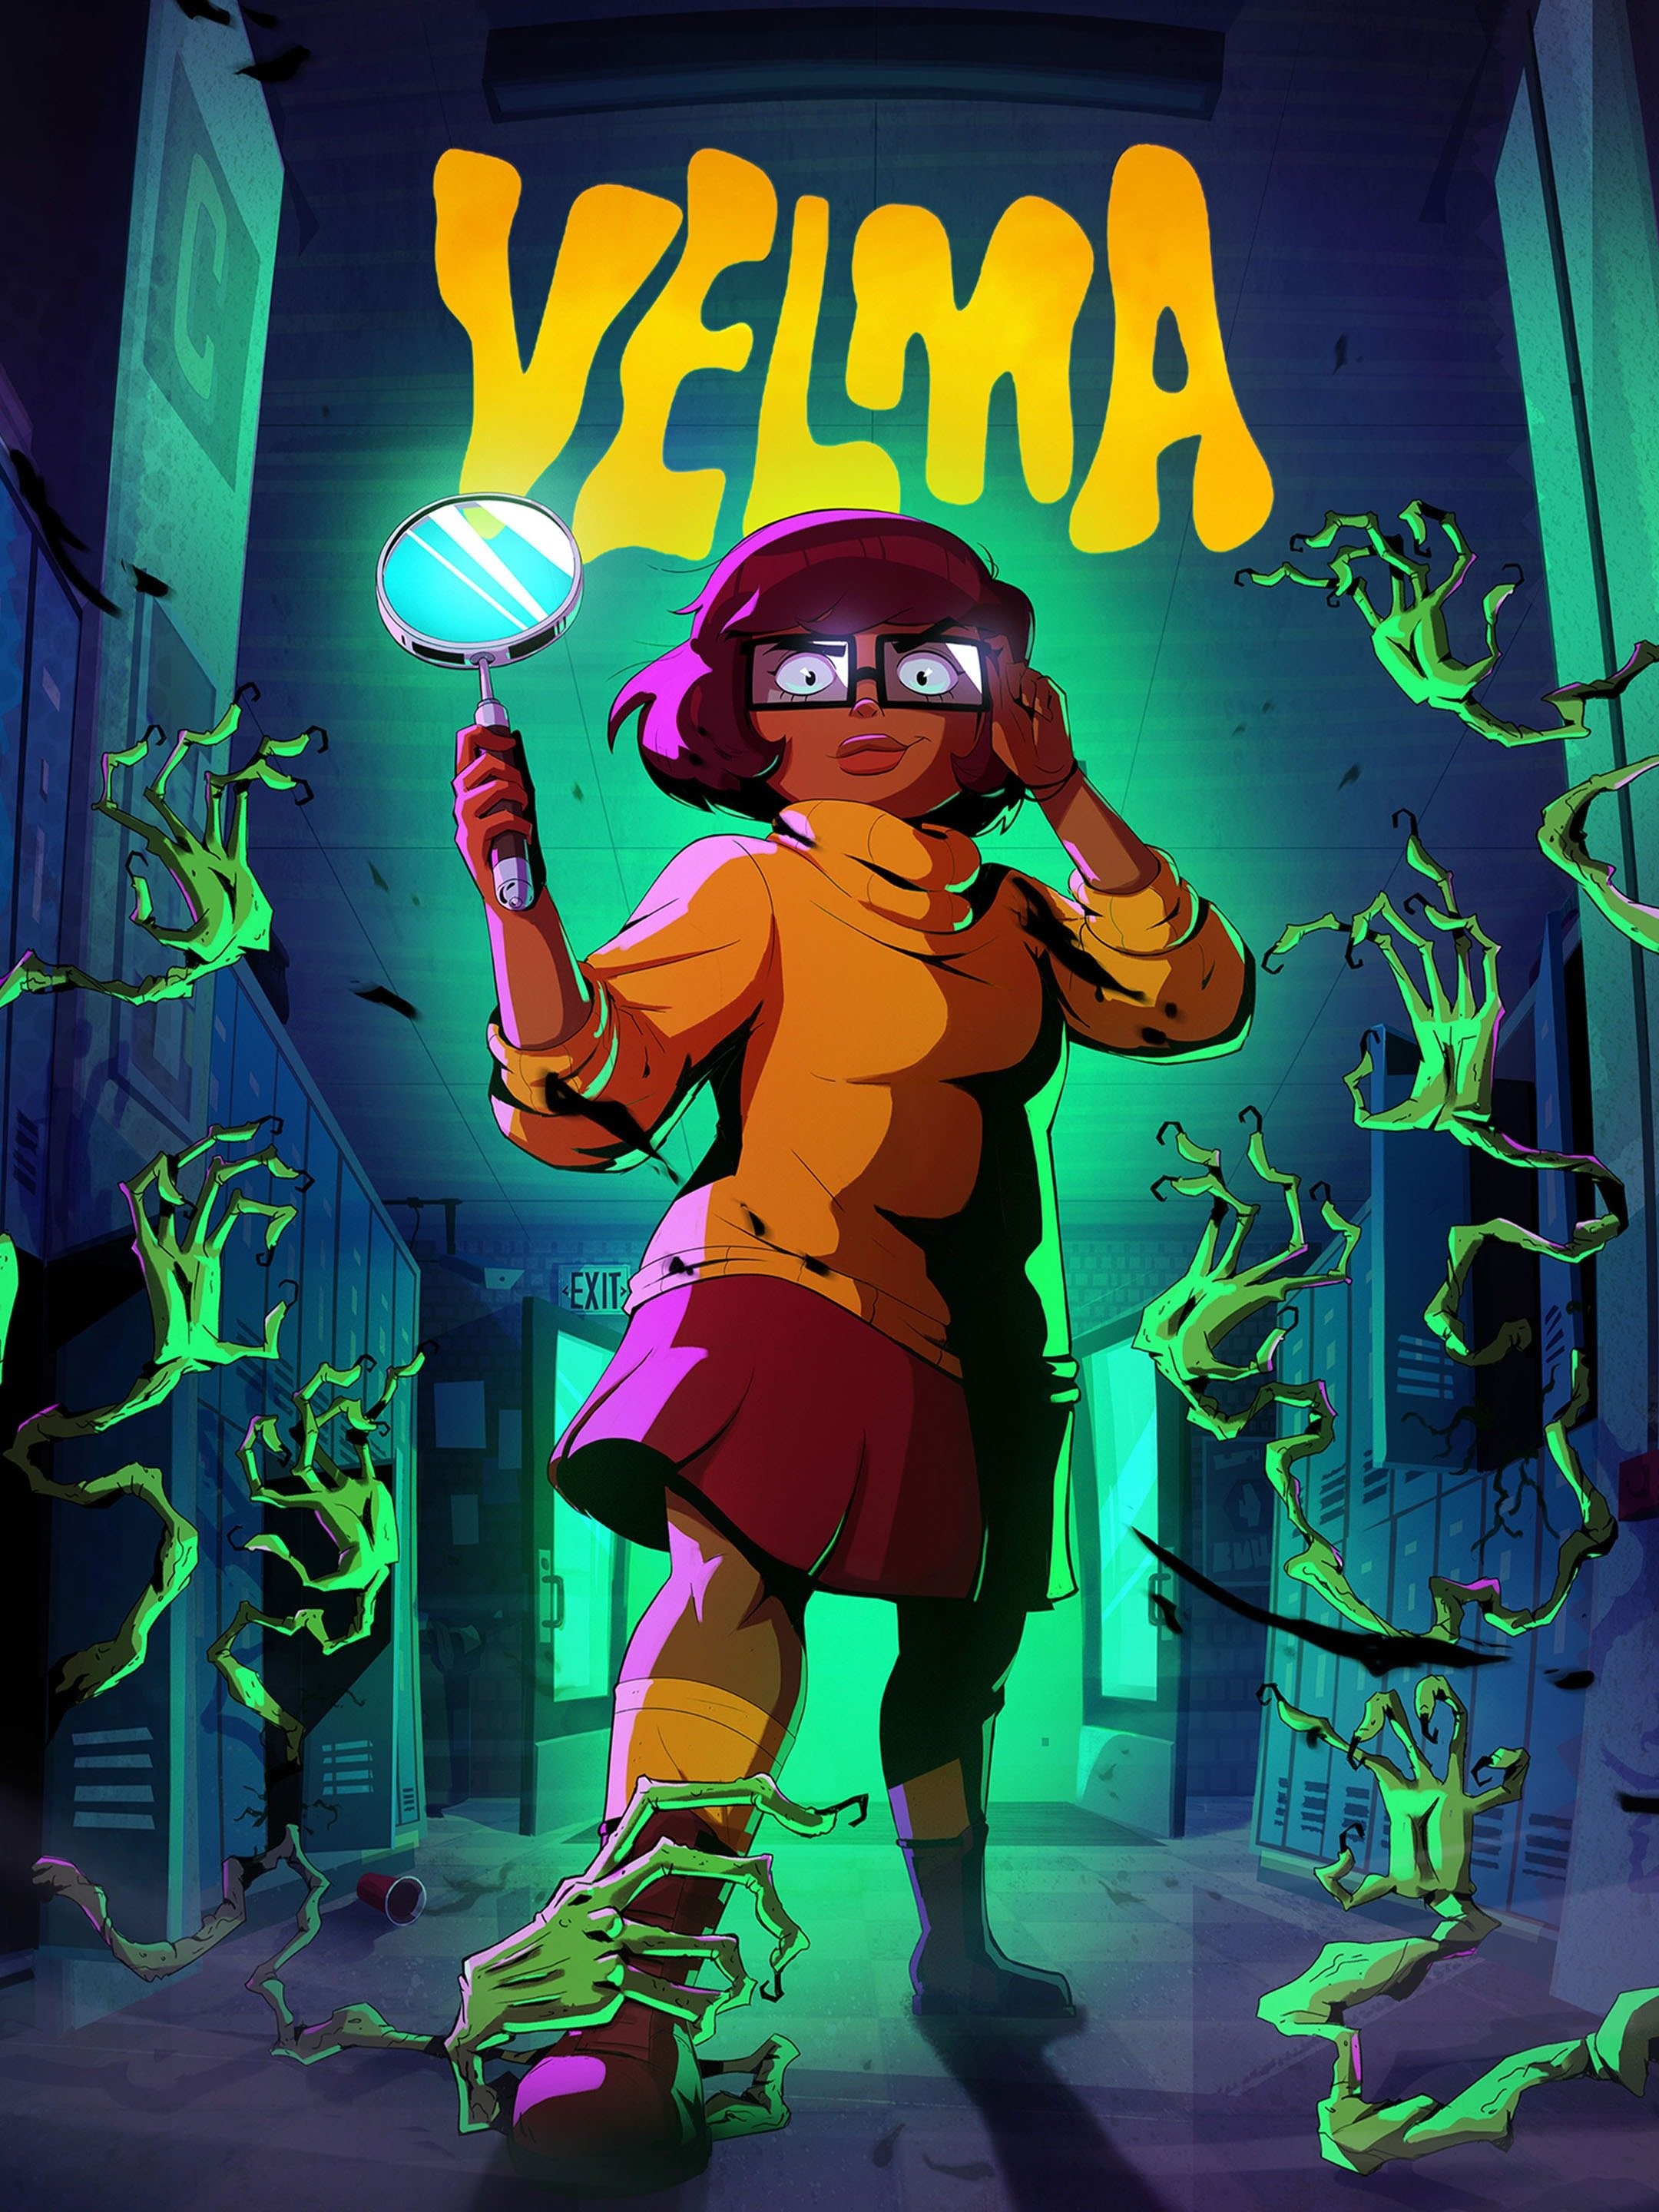 Velma's Rotten Tomatoes Scores Continue to Fall Following New Episodes